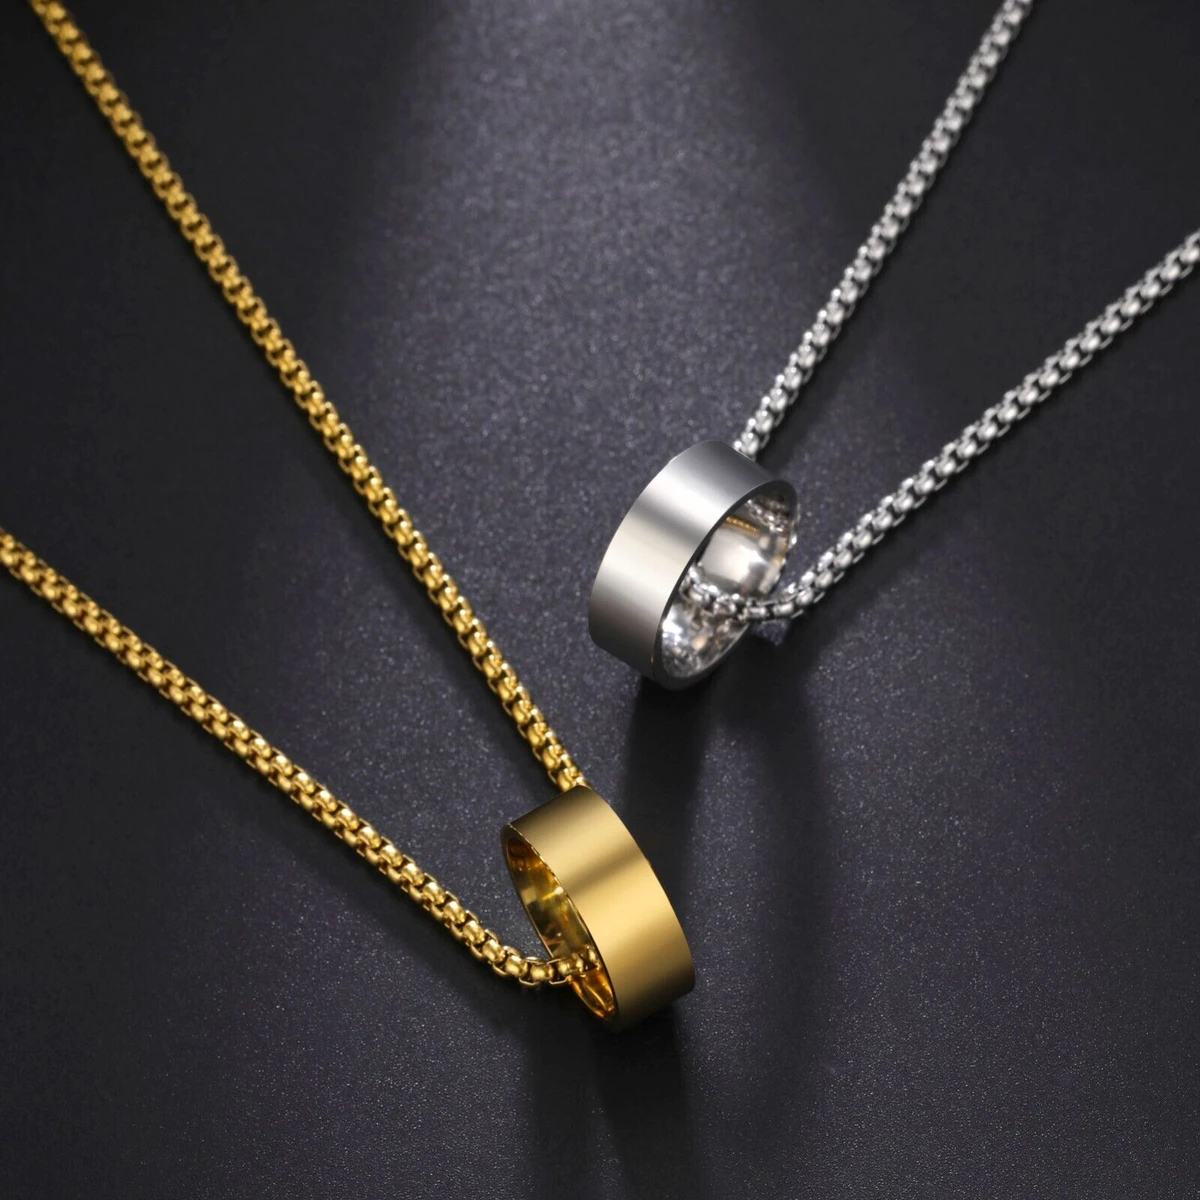 Men's Stainless Steel Nail Necklace with Necklace/Locket